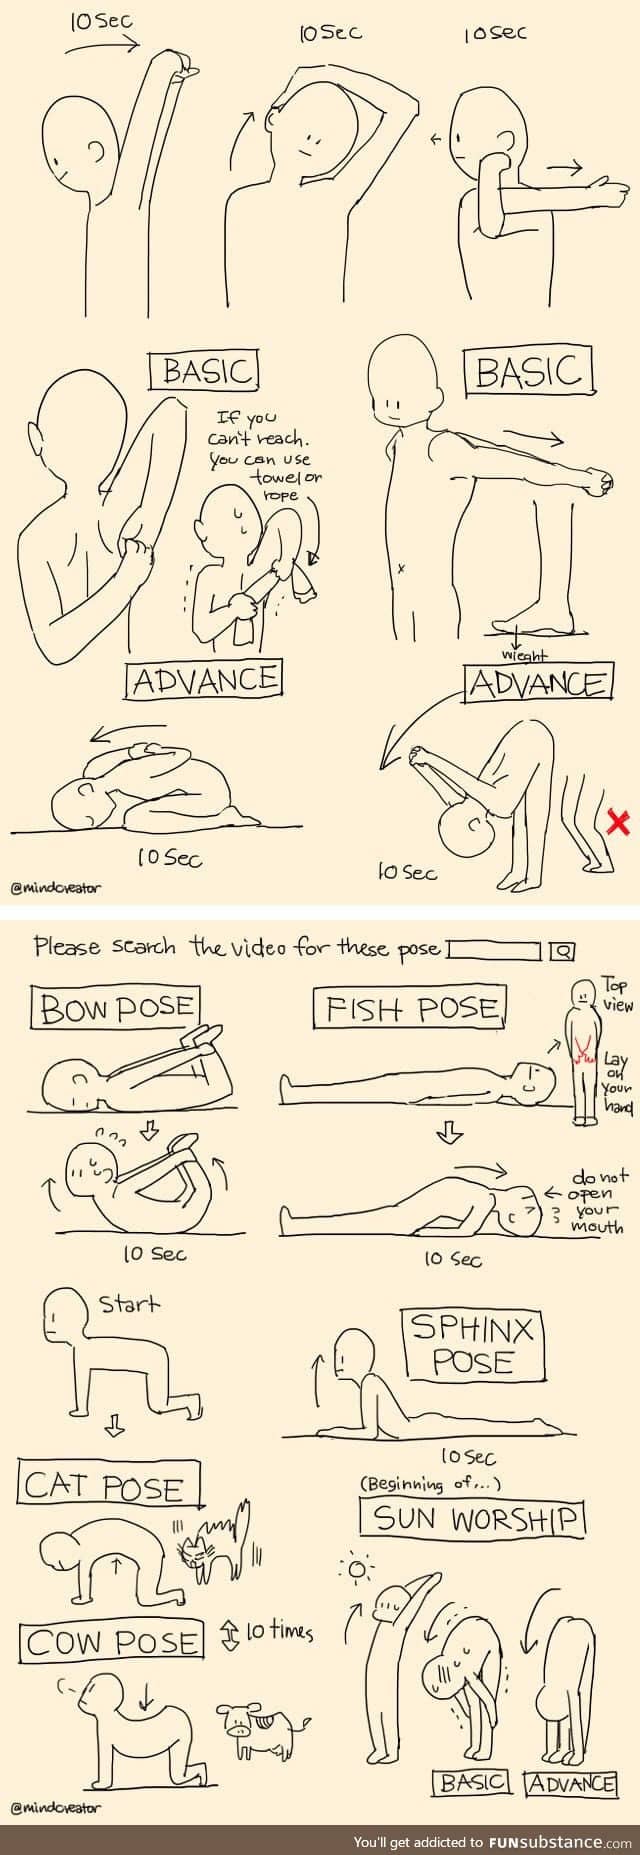 Some yoga training can cure your backache